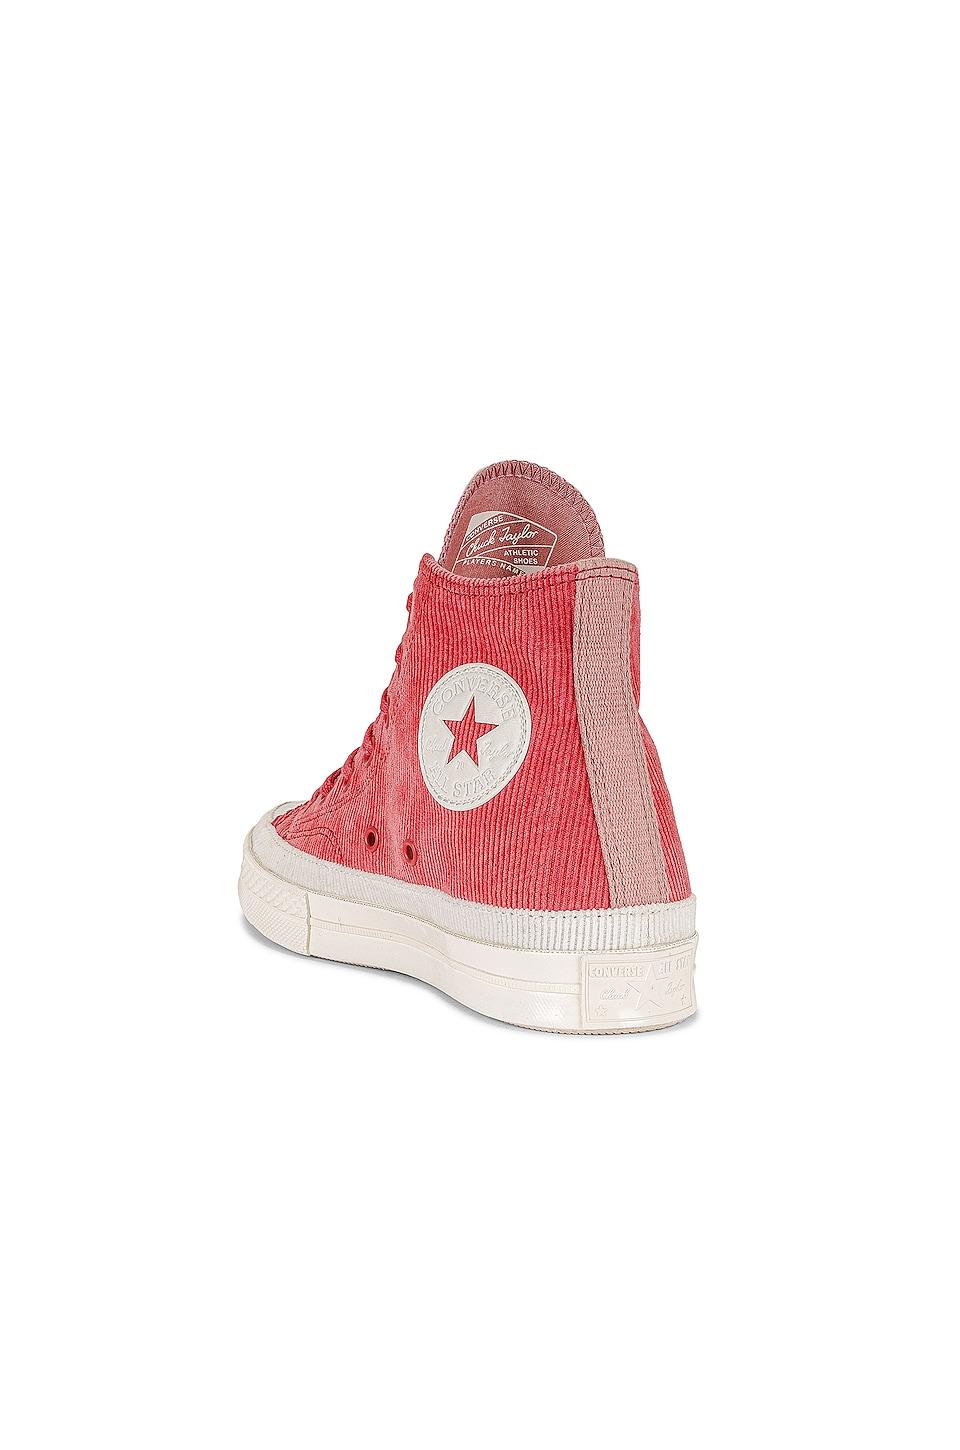 Converse Chuck 70 Workwear Textiles Sneaker in Pink | Lyst